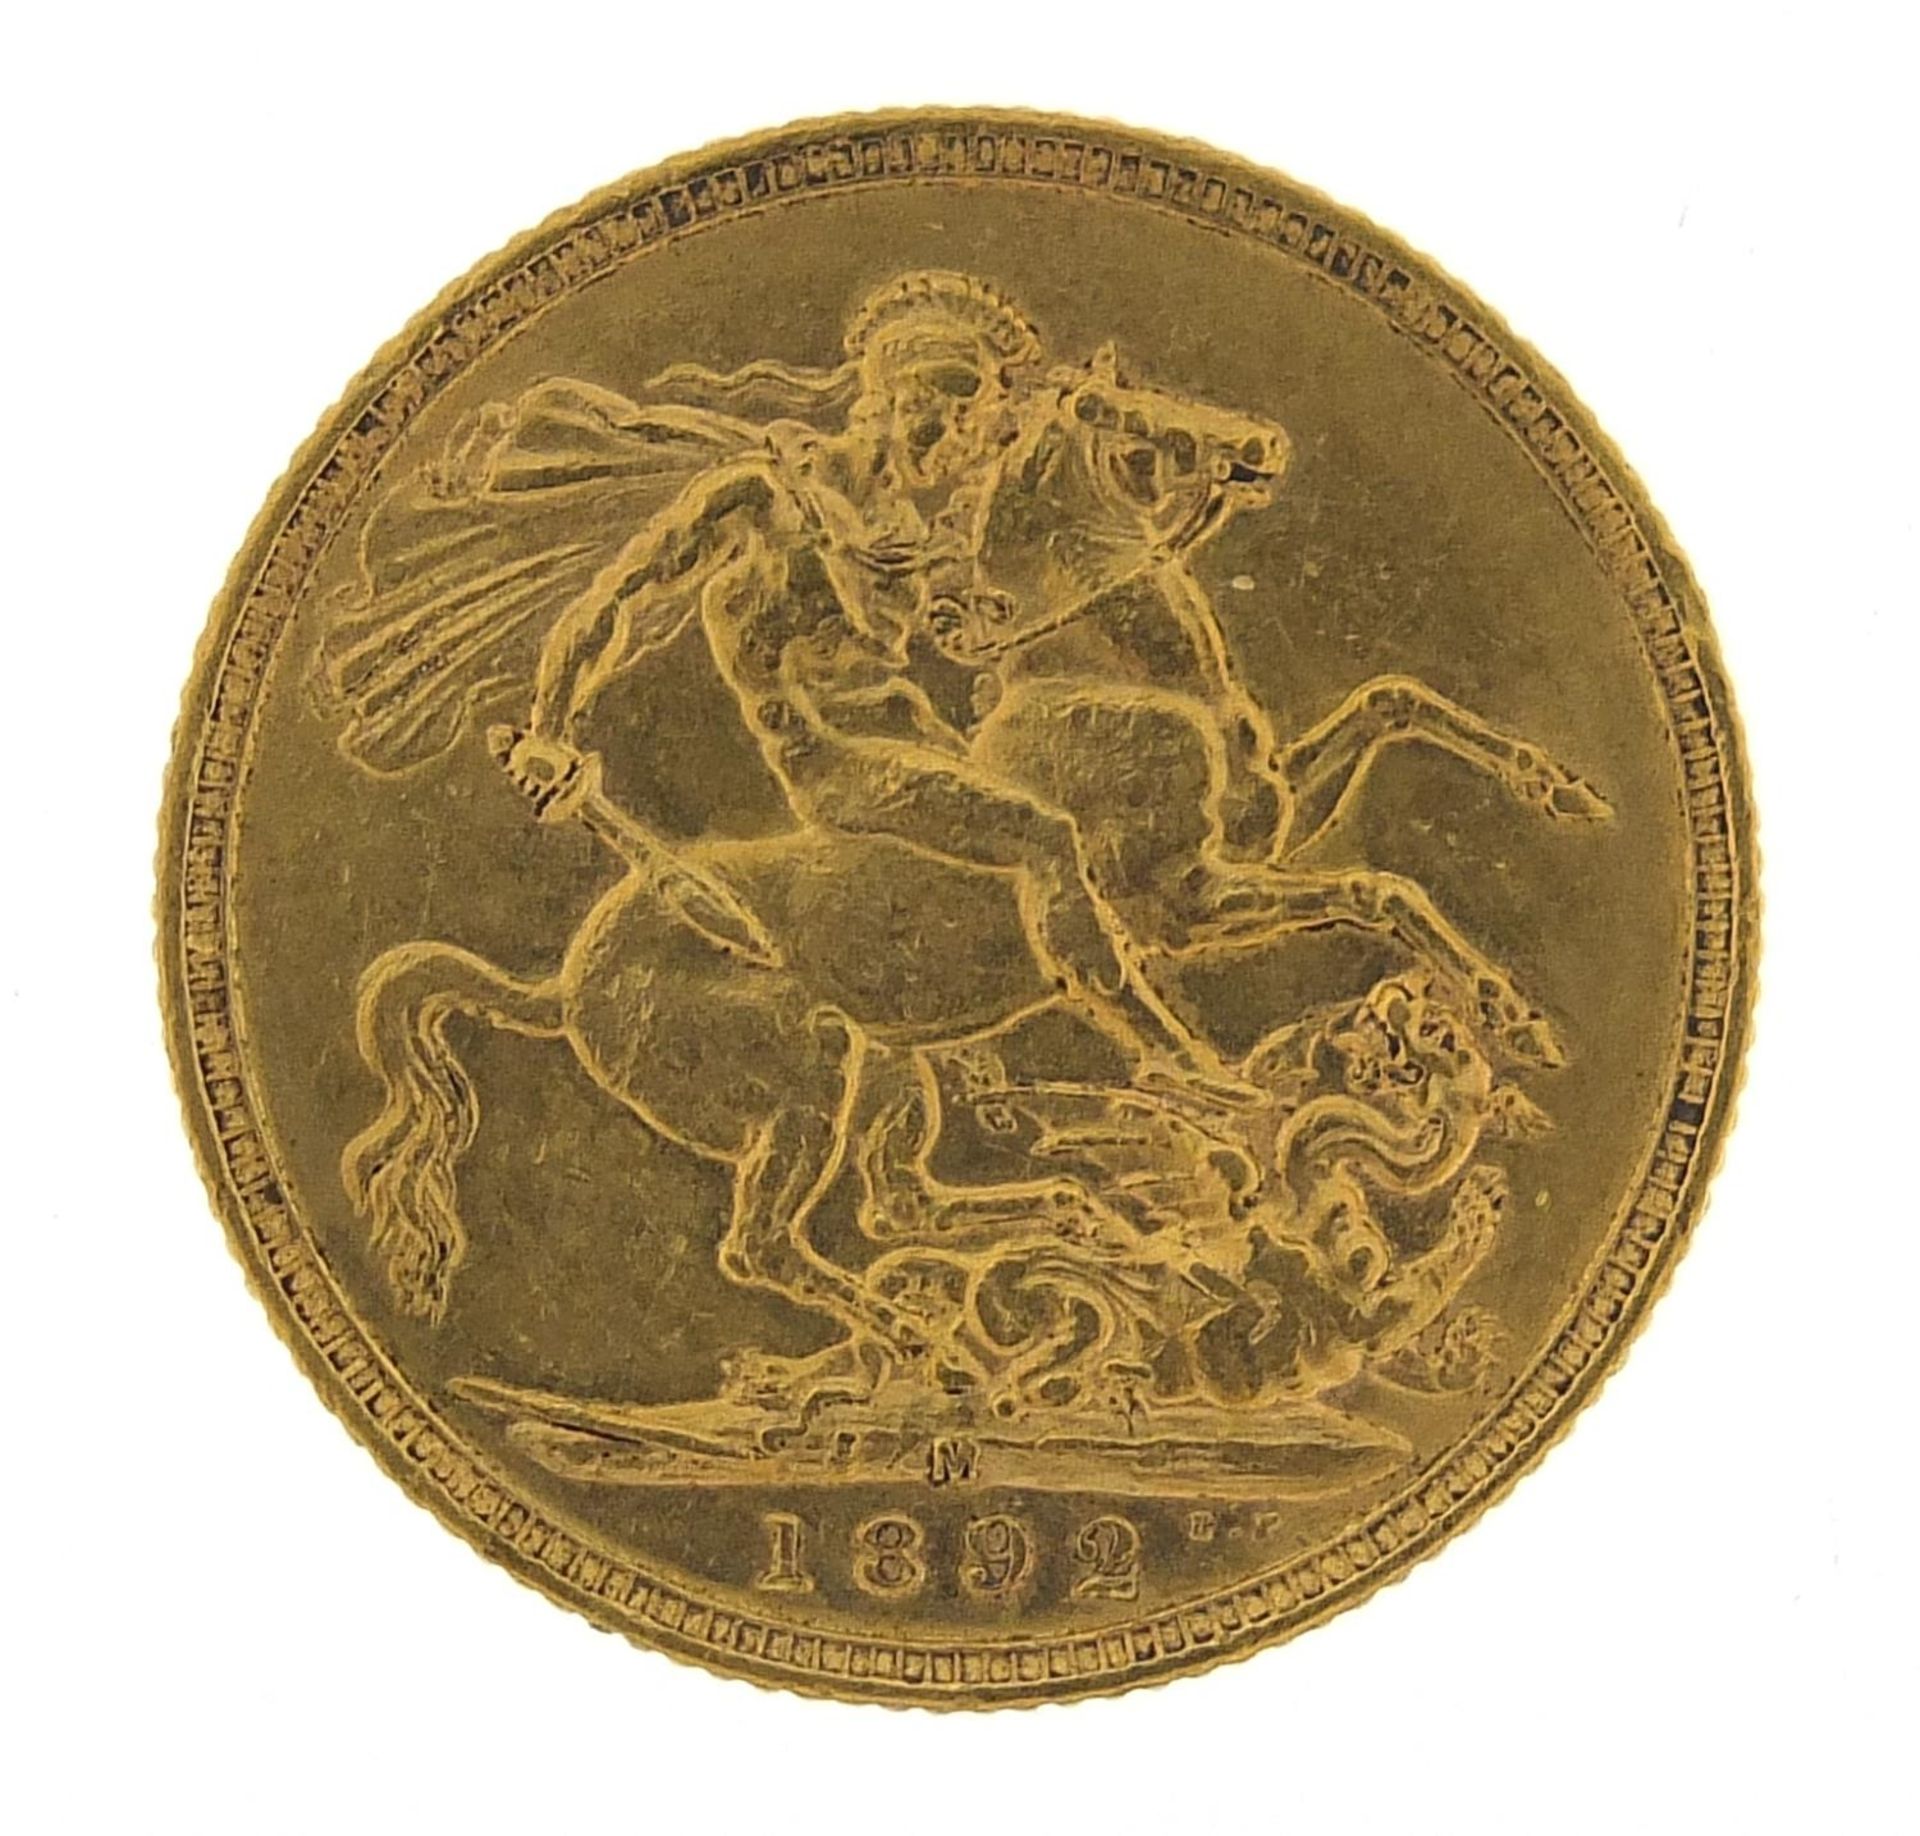 Victoria Jubilee Head 1892 gold sovereign, Melbourne mint - this lot is sold without buyer's